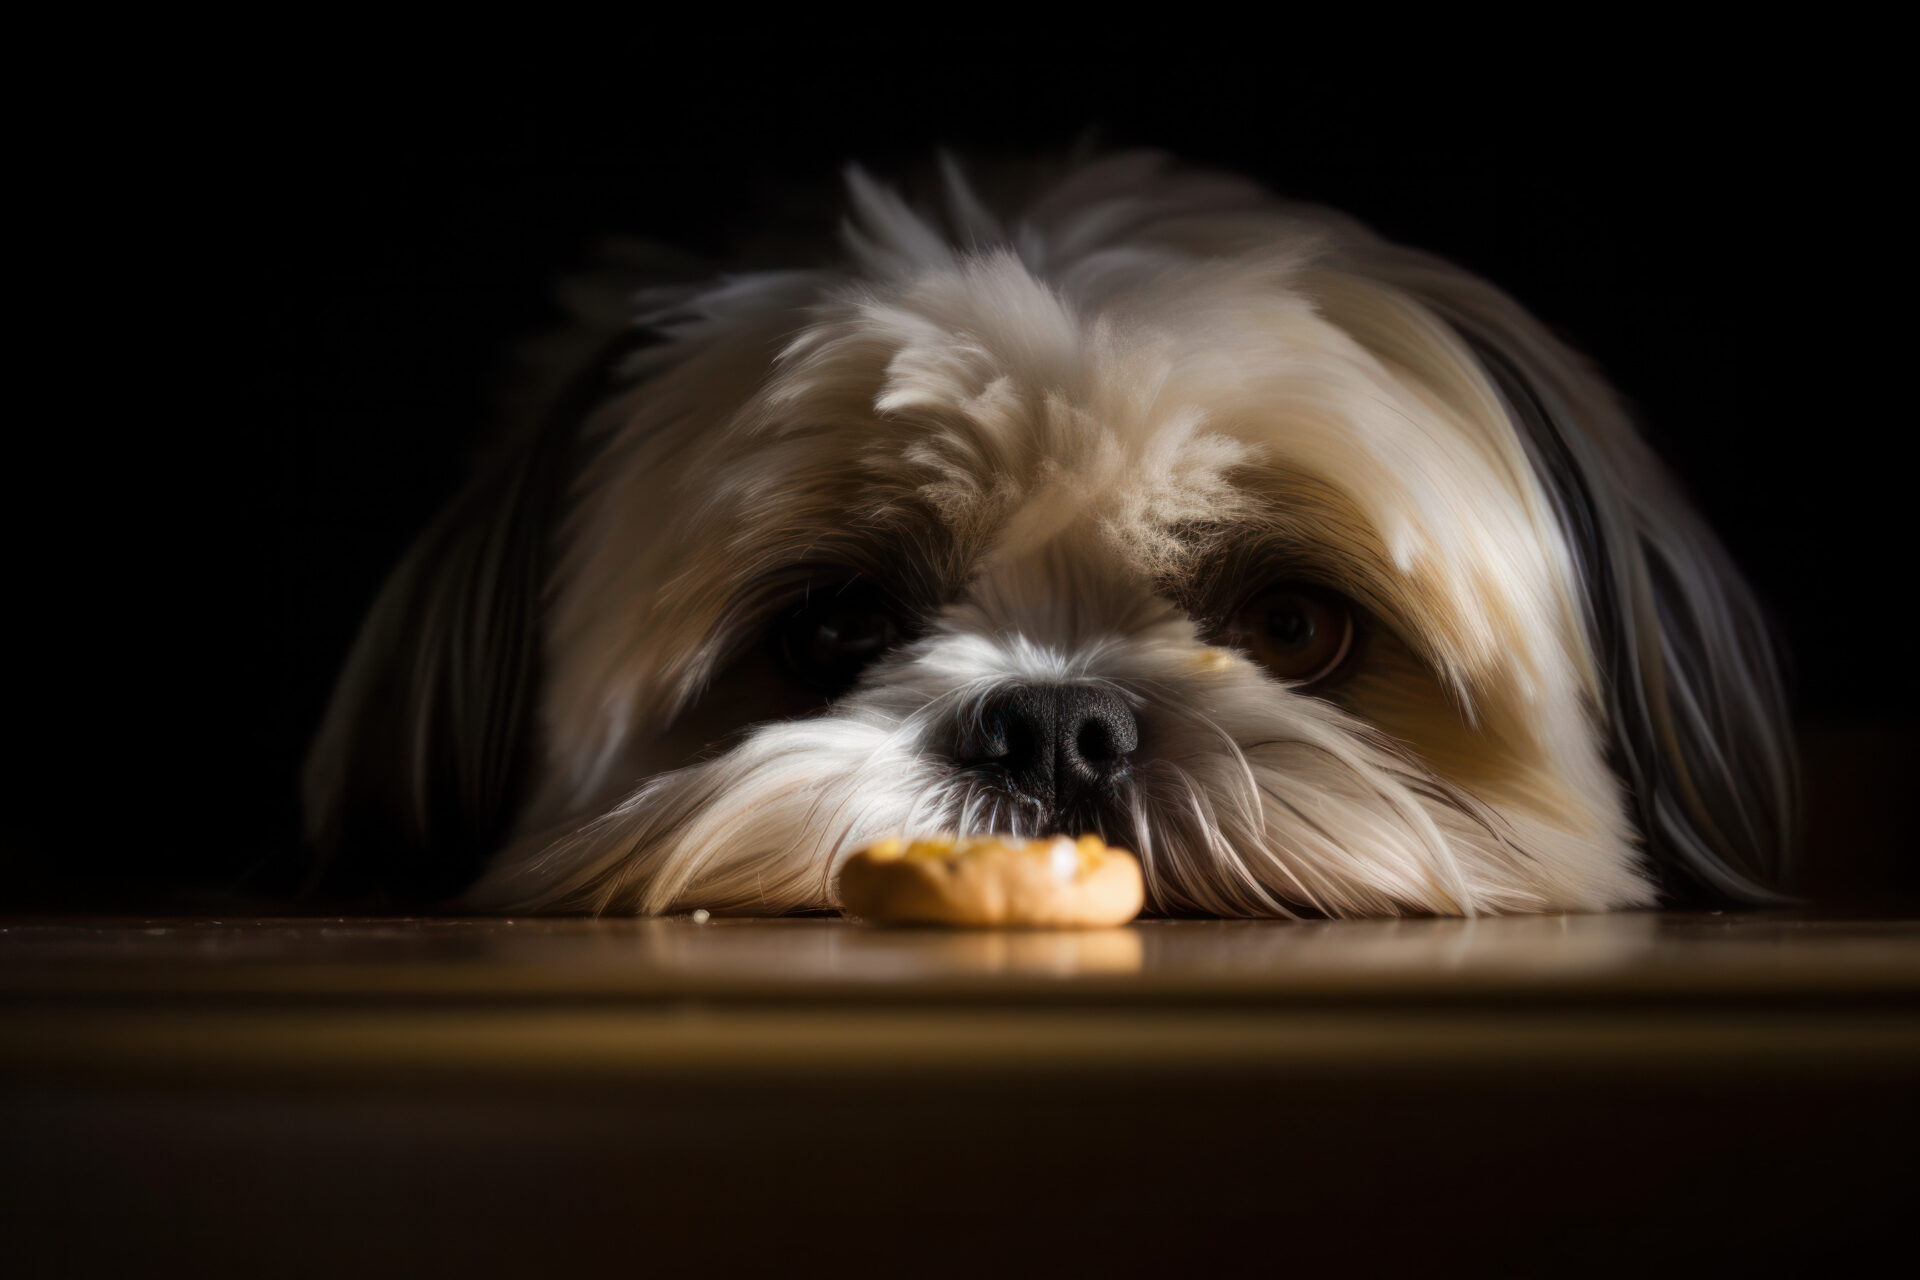 Lhasa apso dog looking at some treats or biscuits